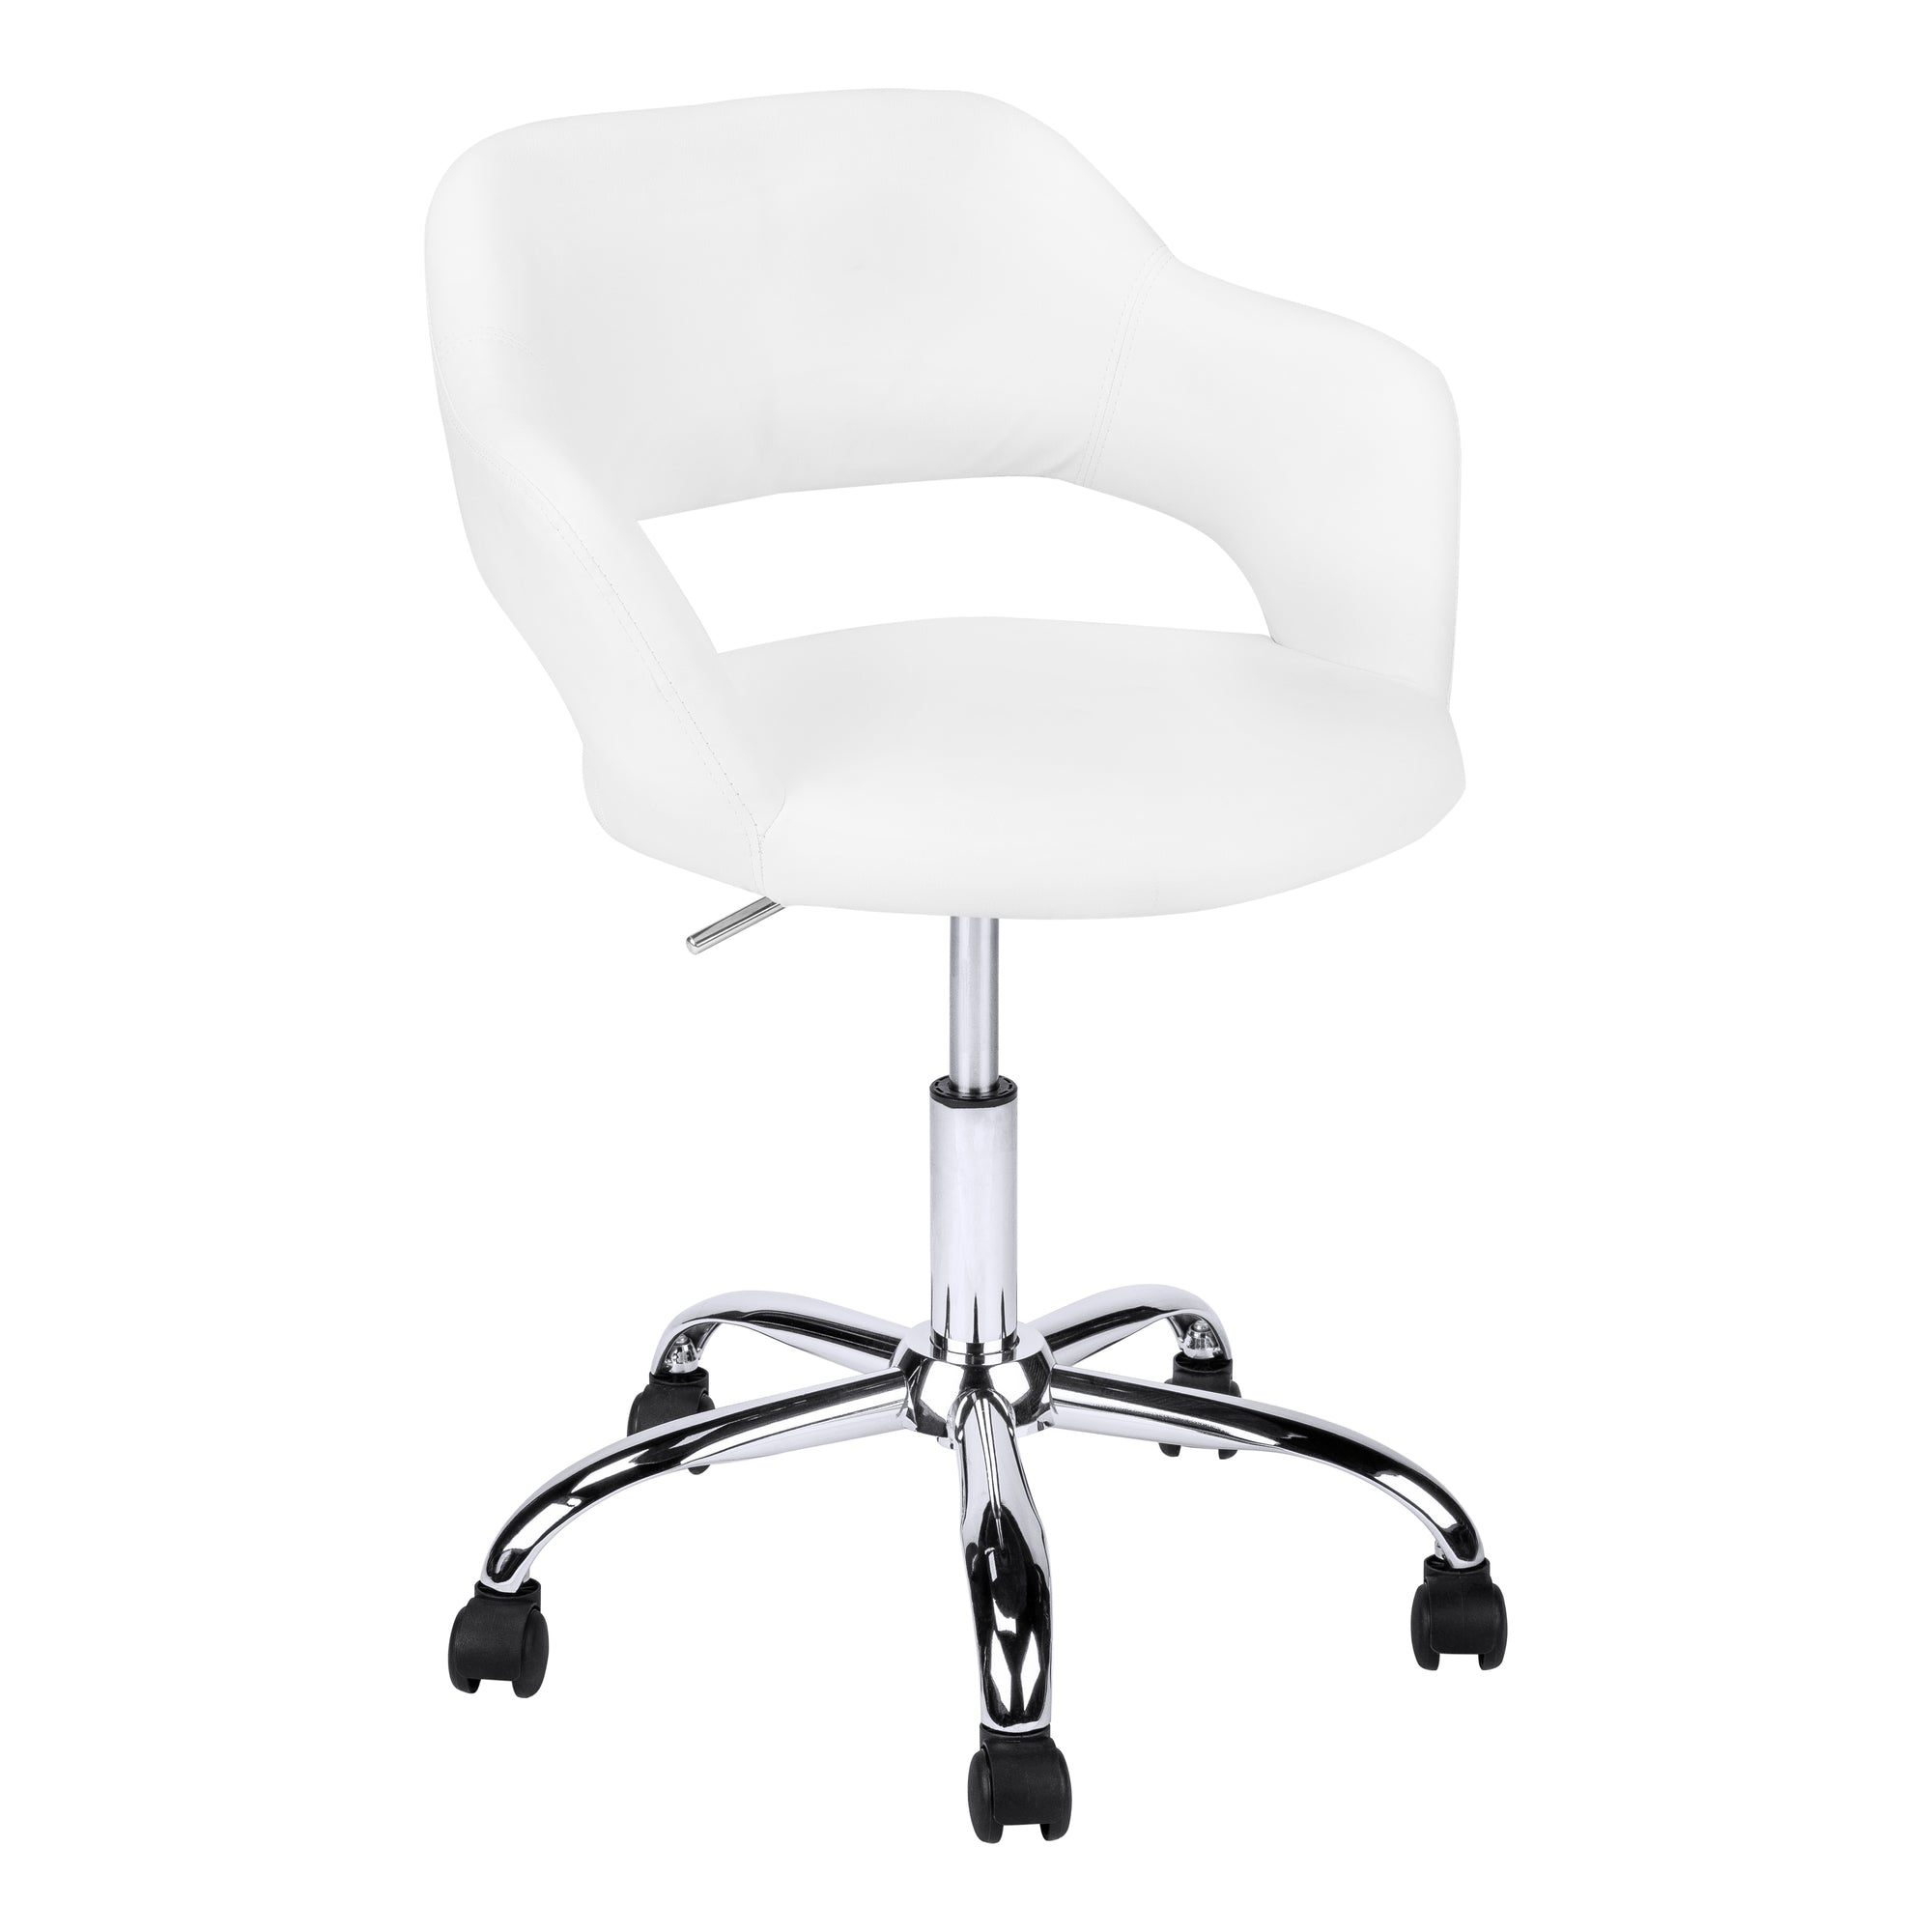 MN-957299    Office Chair, Adjustable Height, Swivel, Ergonomic, Armrests, Computer Desk, Office, Metal Base, Leather Look, White, Chrome, Contemporary, Modern